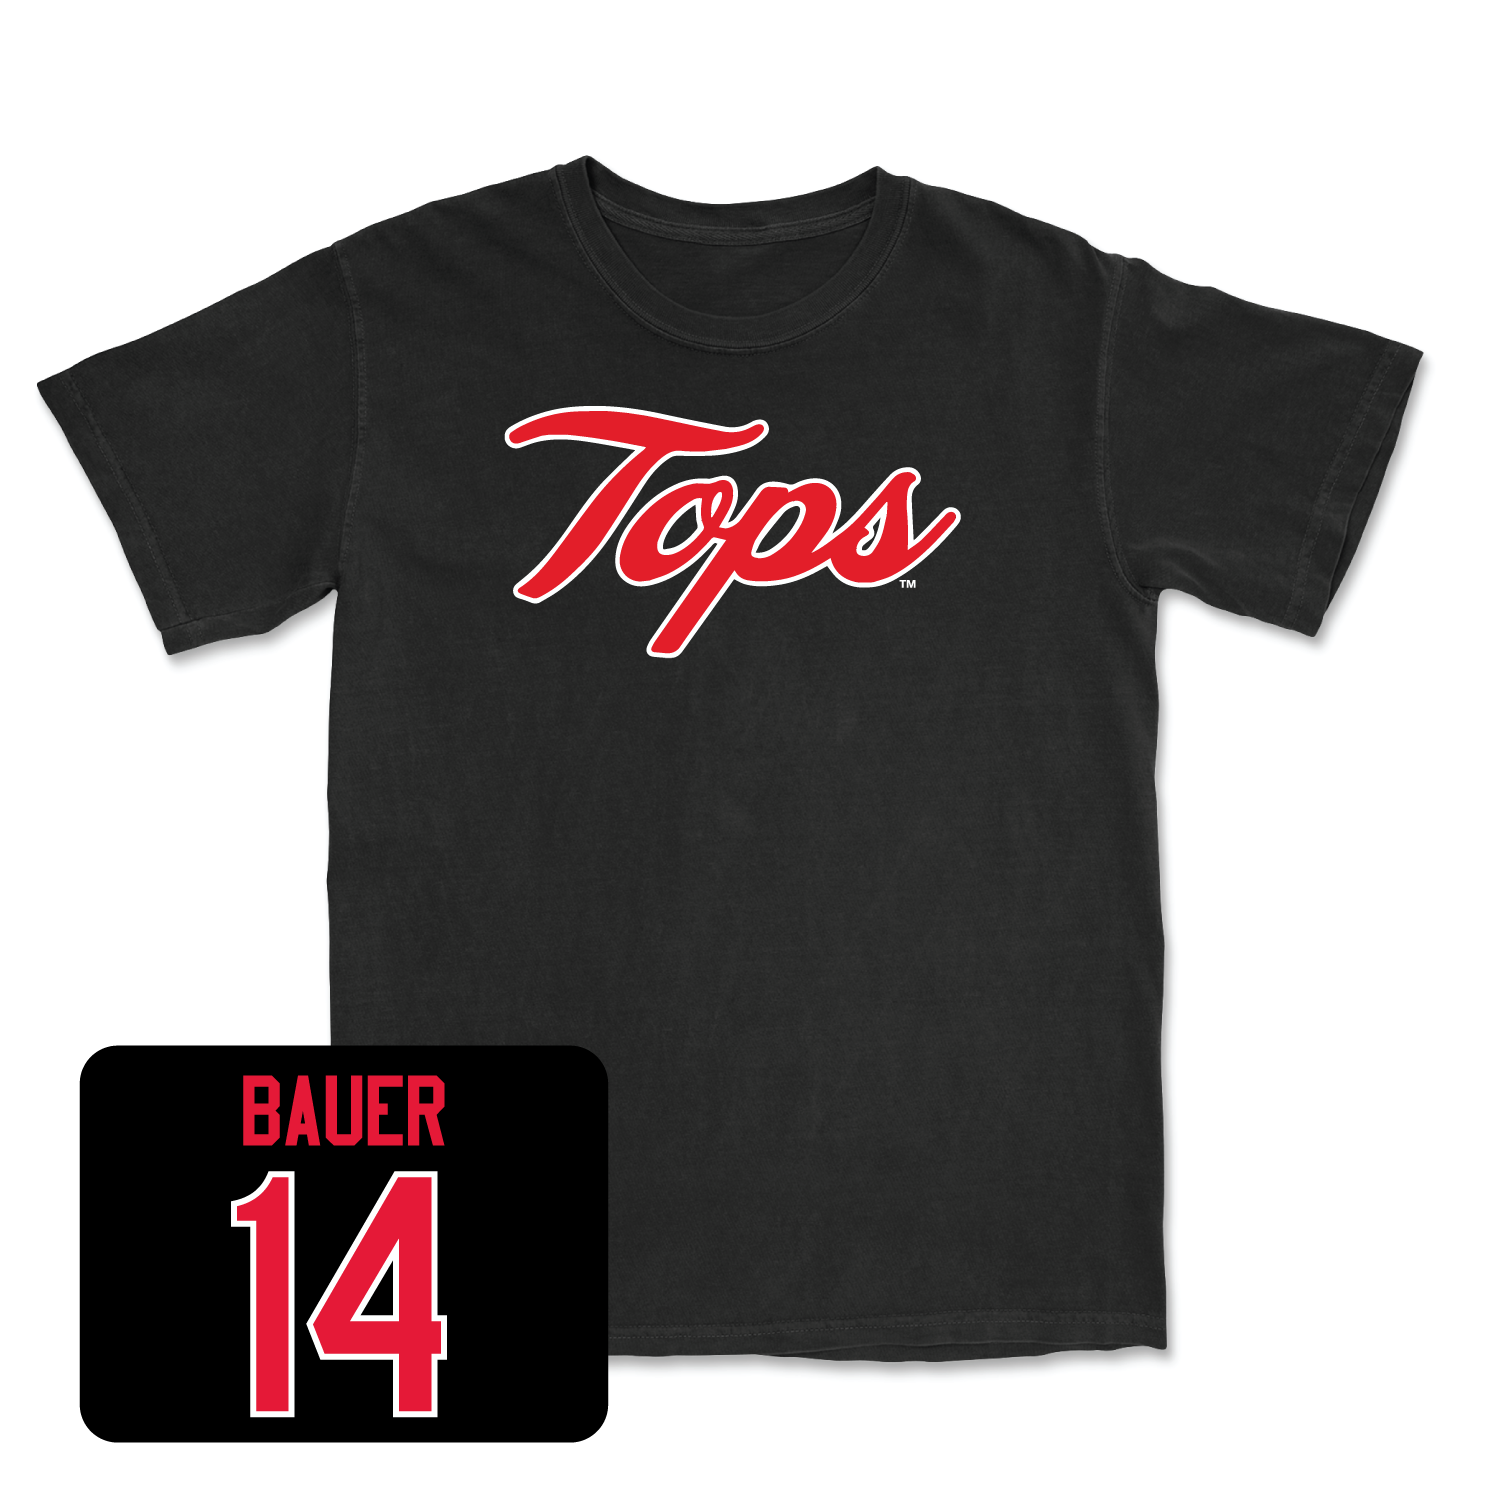 Black Women's Volleyball Tops Tee 2X-Large / Callie Bauer | #14